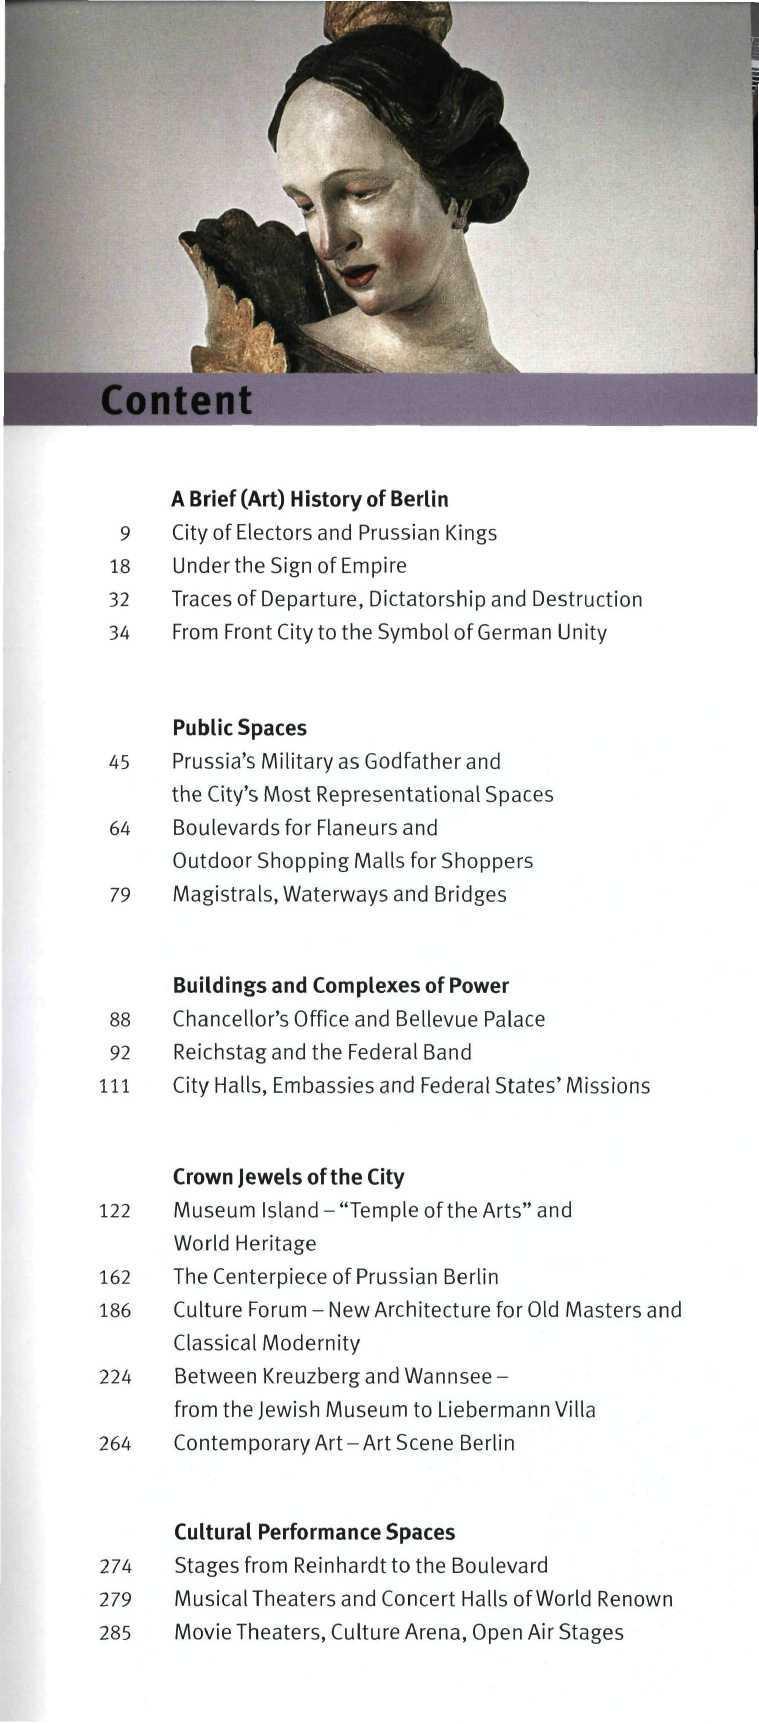 Content A Brief (Art) History of Berlin 9 City ofelectors and Prussian Kings 18 Underthe Sign of Empire 32 Traces of Departure, Dictatorship and Destruction 34 From Front City tothe Symbol ofgerman